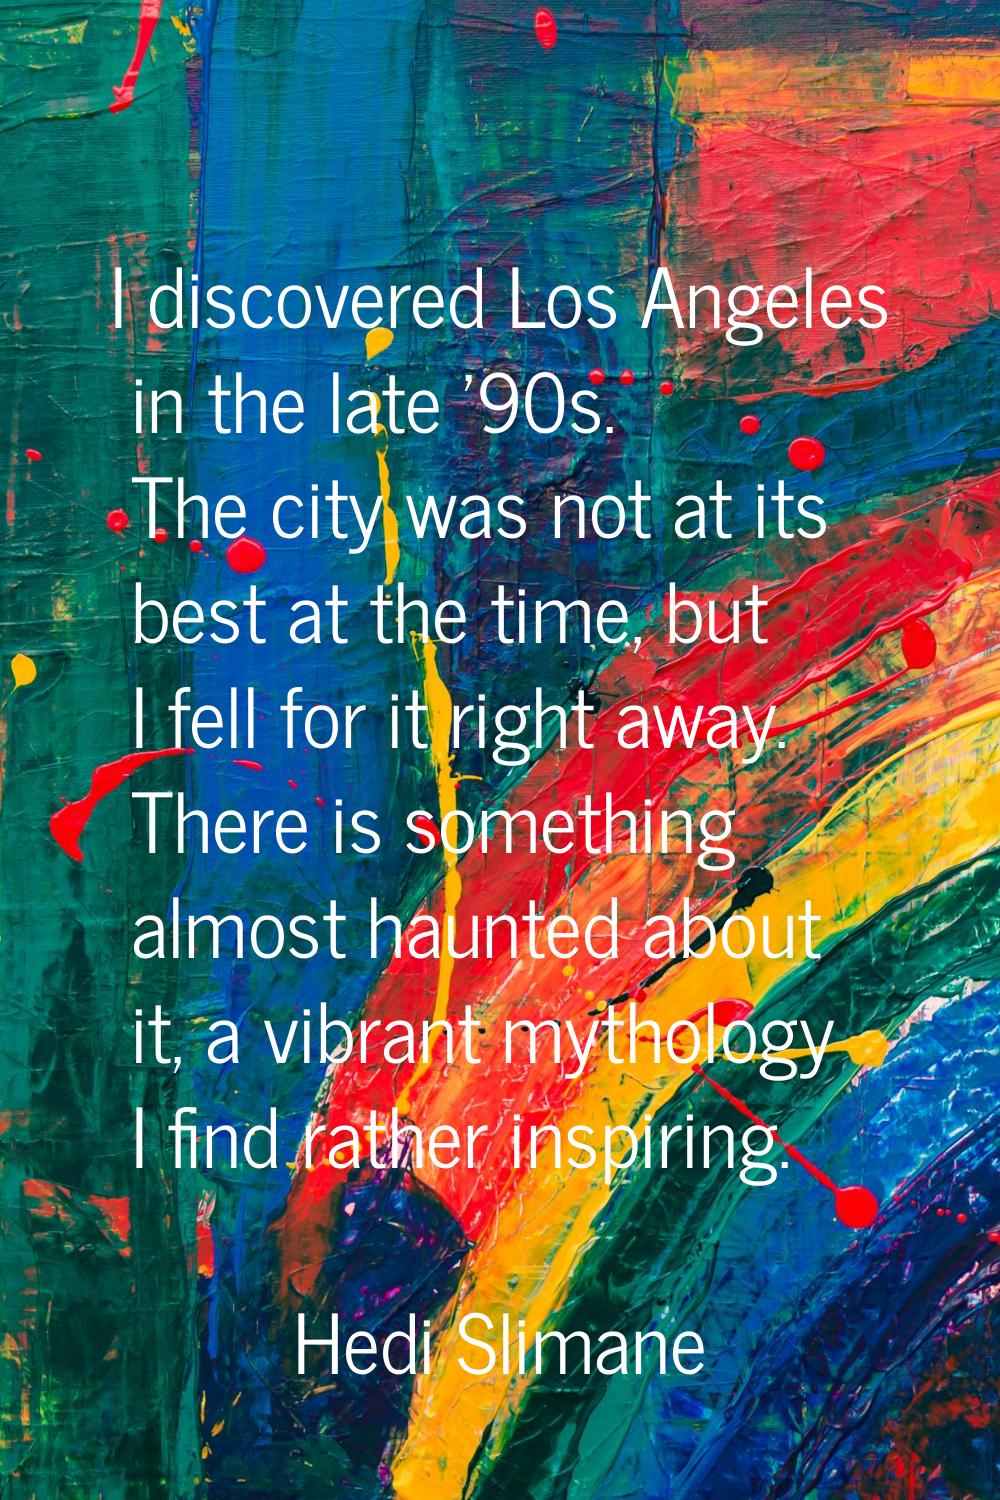 I discovered Los Angeles in the late '90s. The city was not at its best at the time, but I fell for